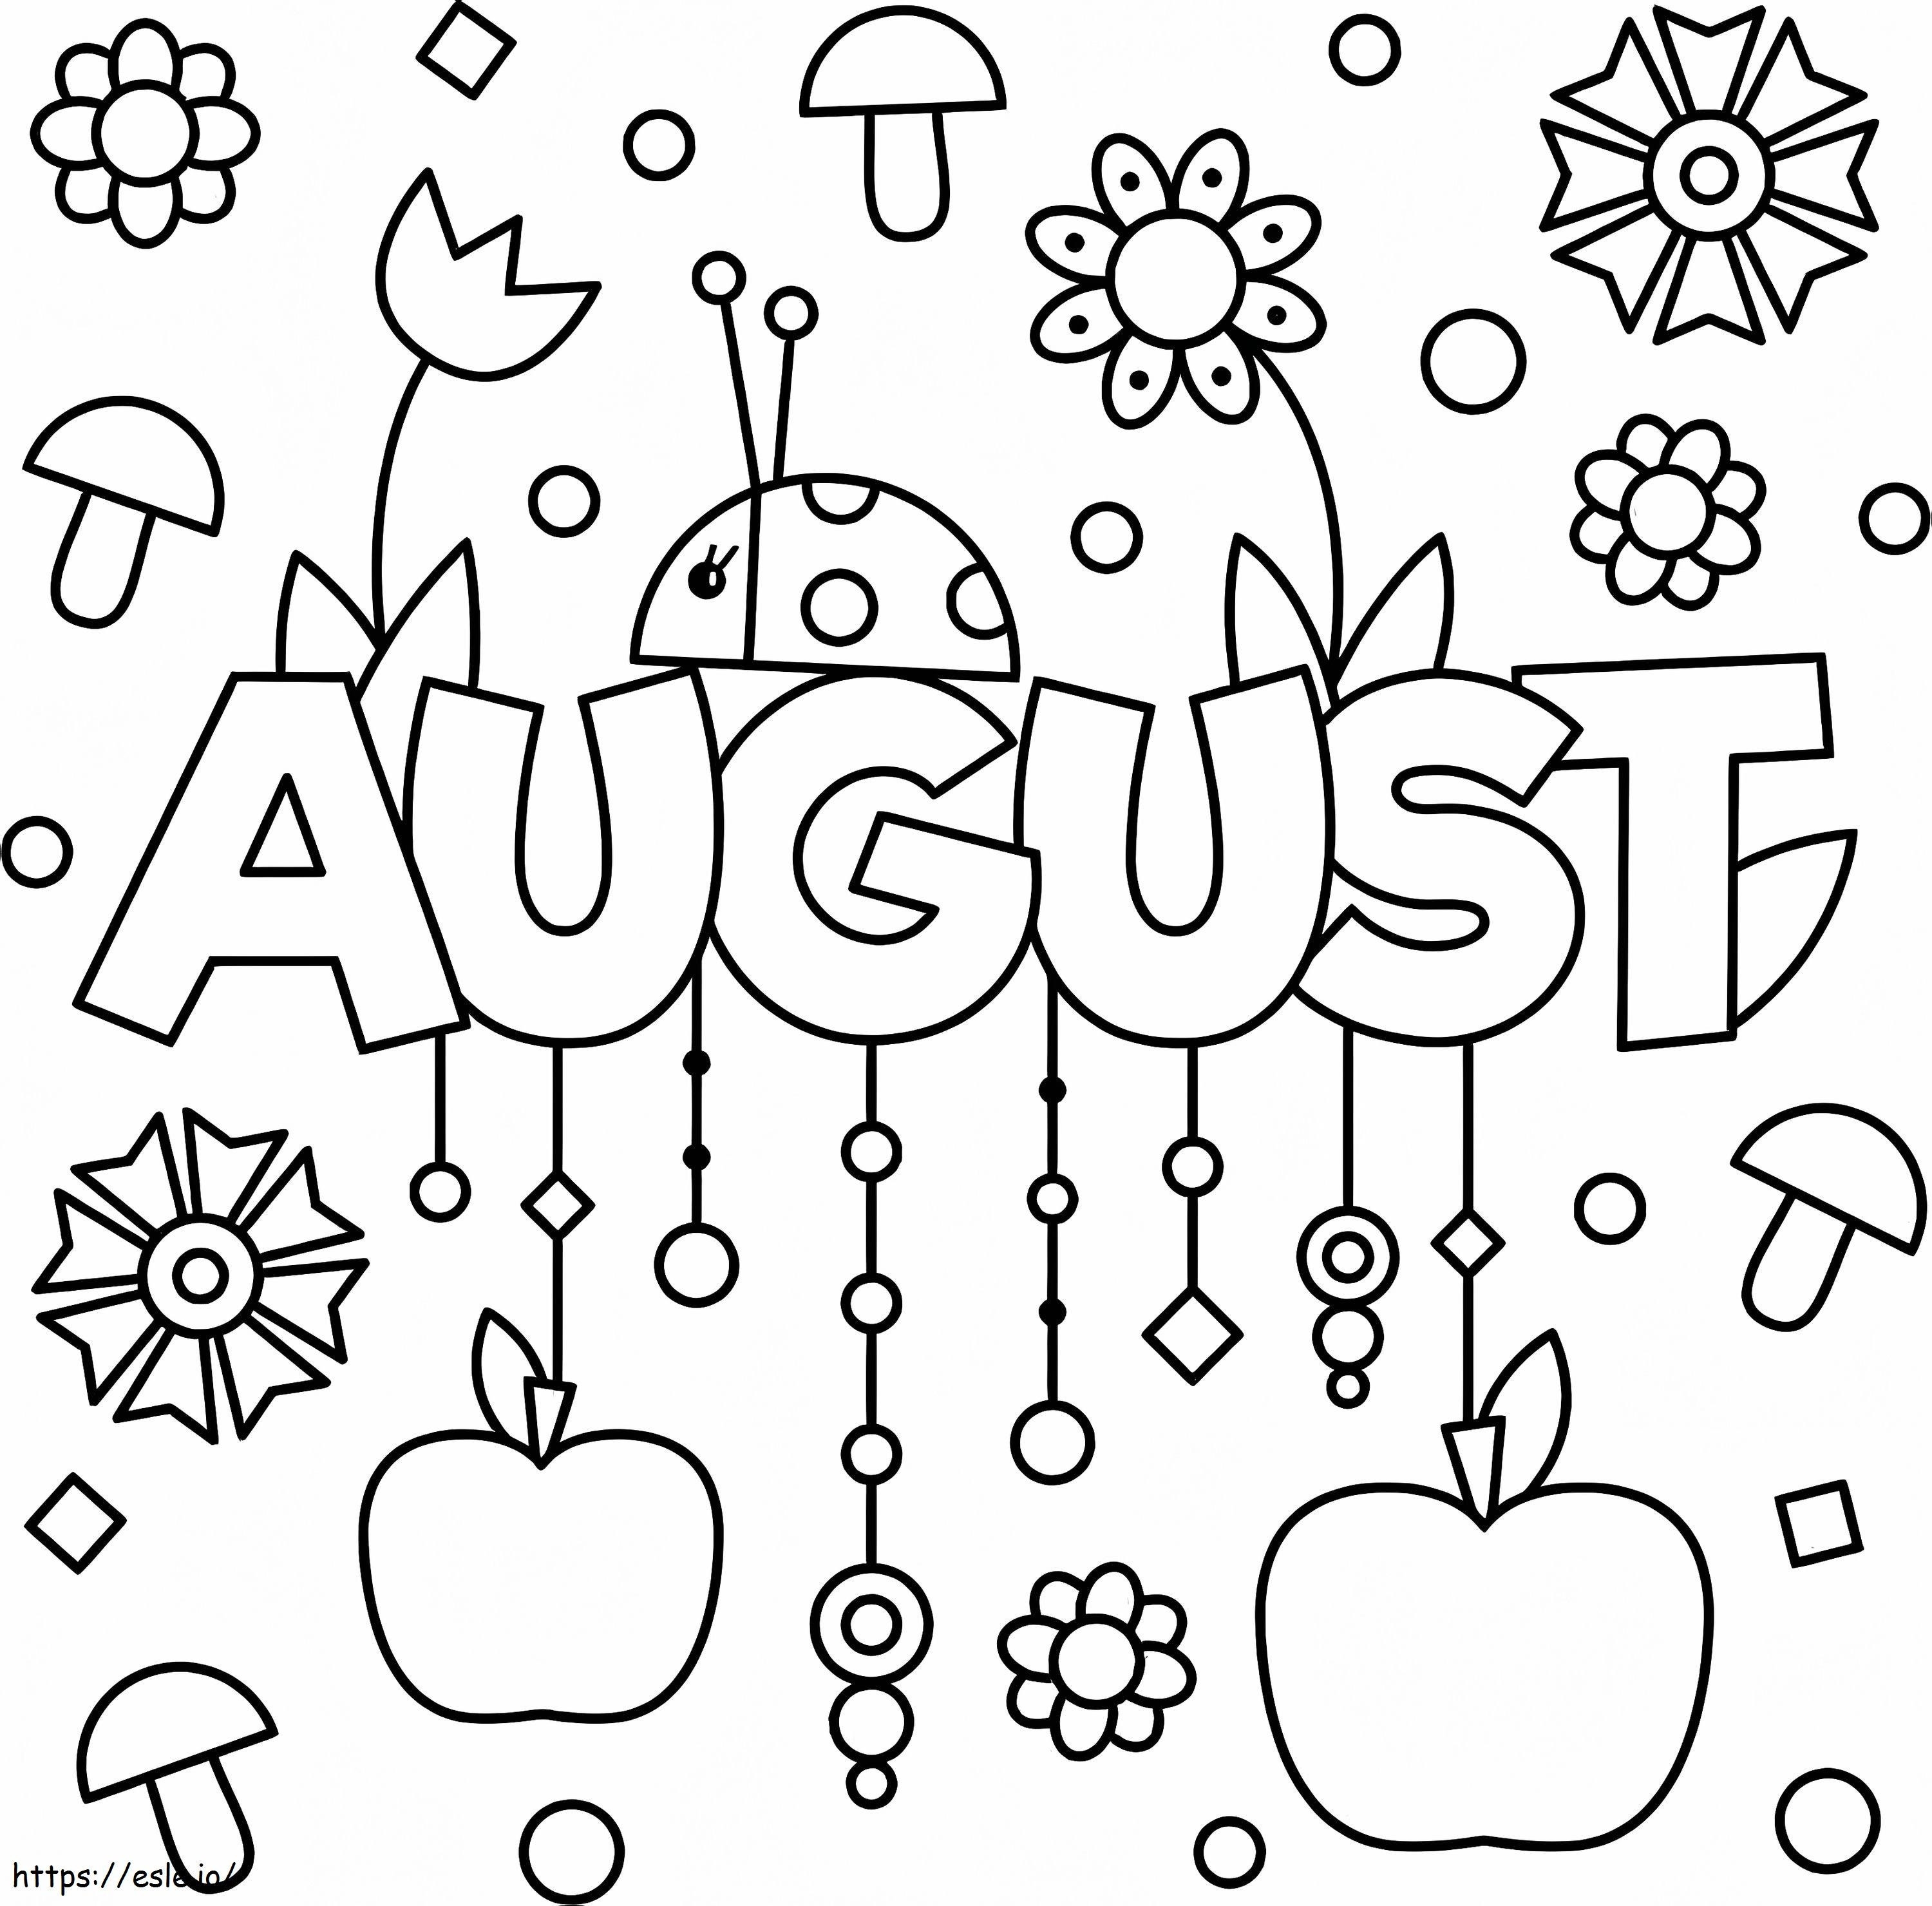 Cool August coloring page